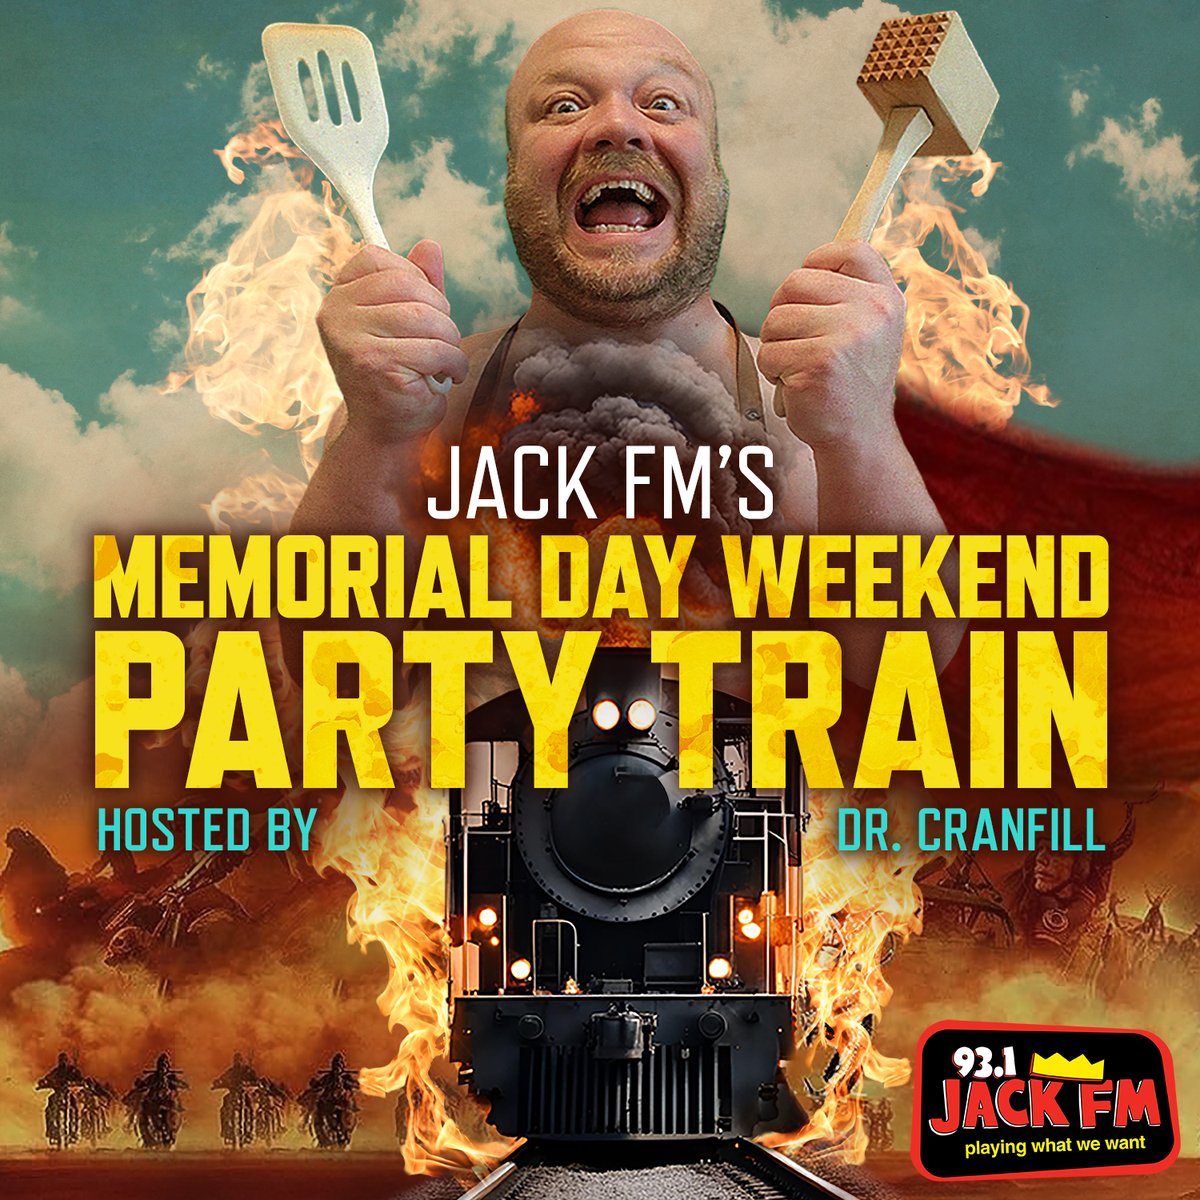 In honor of Mad Max Furiosa hitting theaters this week, the JACK FM Party Train is now the WAR RIG. You've been warned. Memorial Day Party Train takes off tomorrow at 1pm and drives all the way through Monday at 5pm! #931jackfm #memorialdayweekend #madmax #furiosa